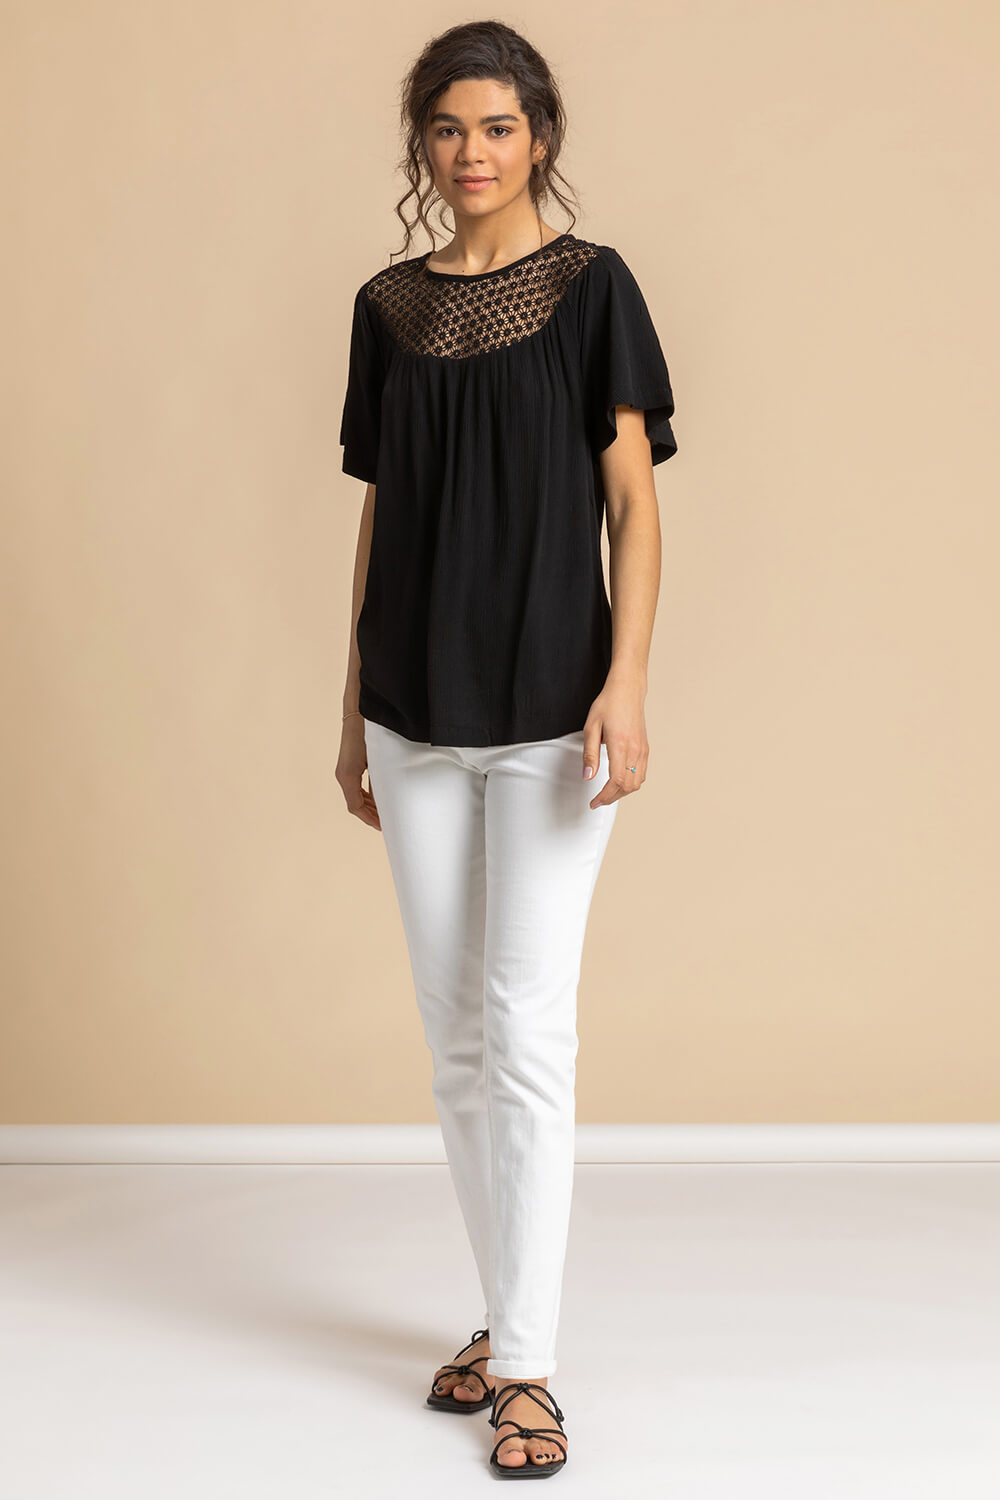 Black Lace Panel Tunic Top, Image 3 of 5